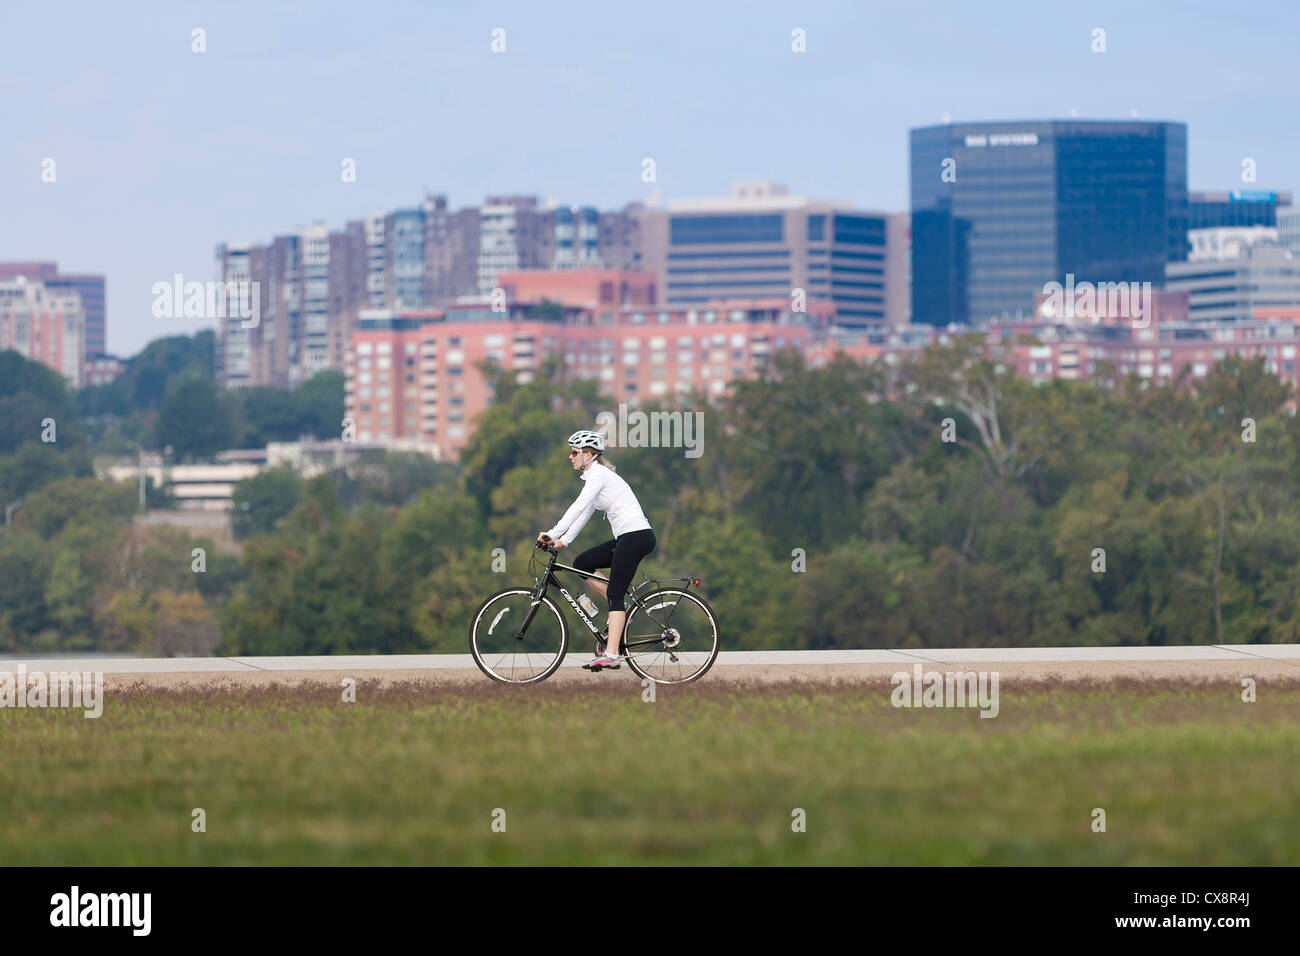 Woman riding a bicycle in urban scenery Stock Photo